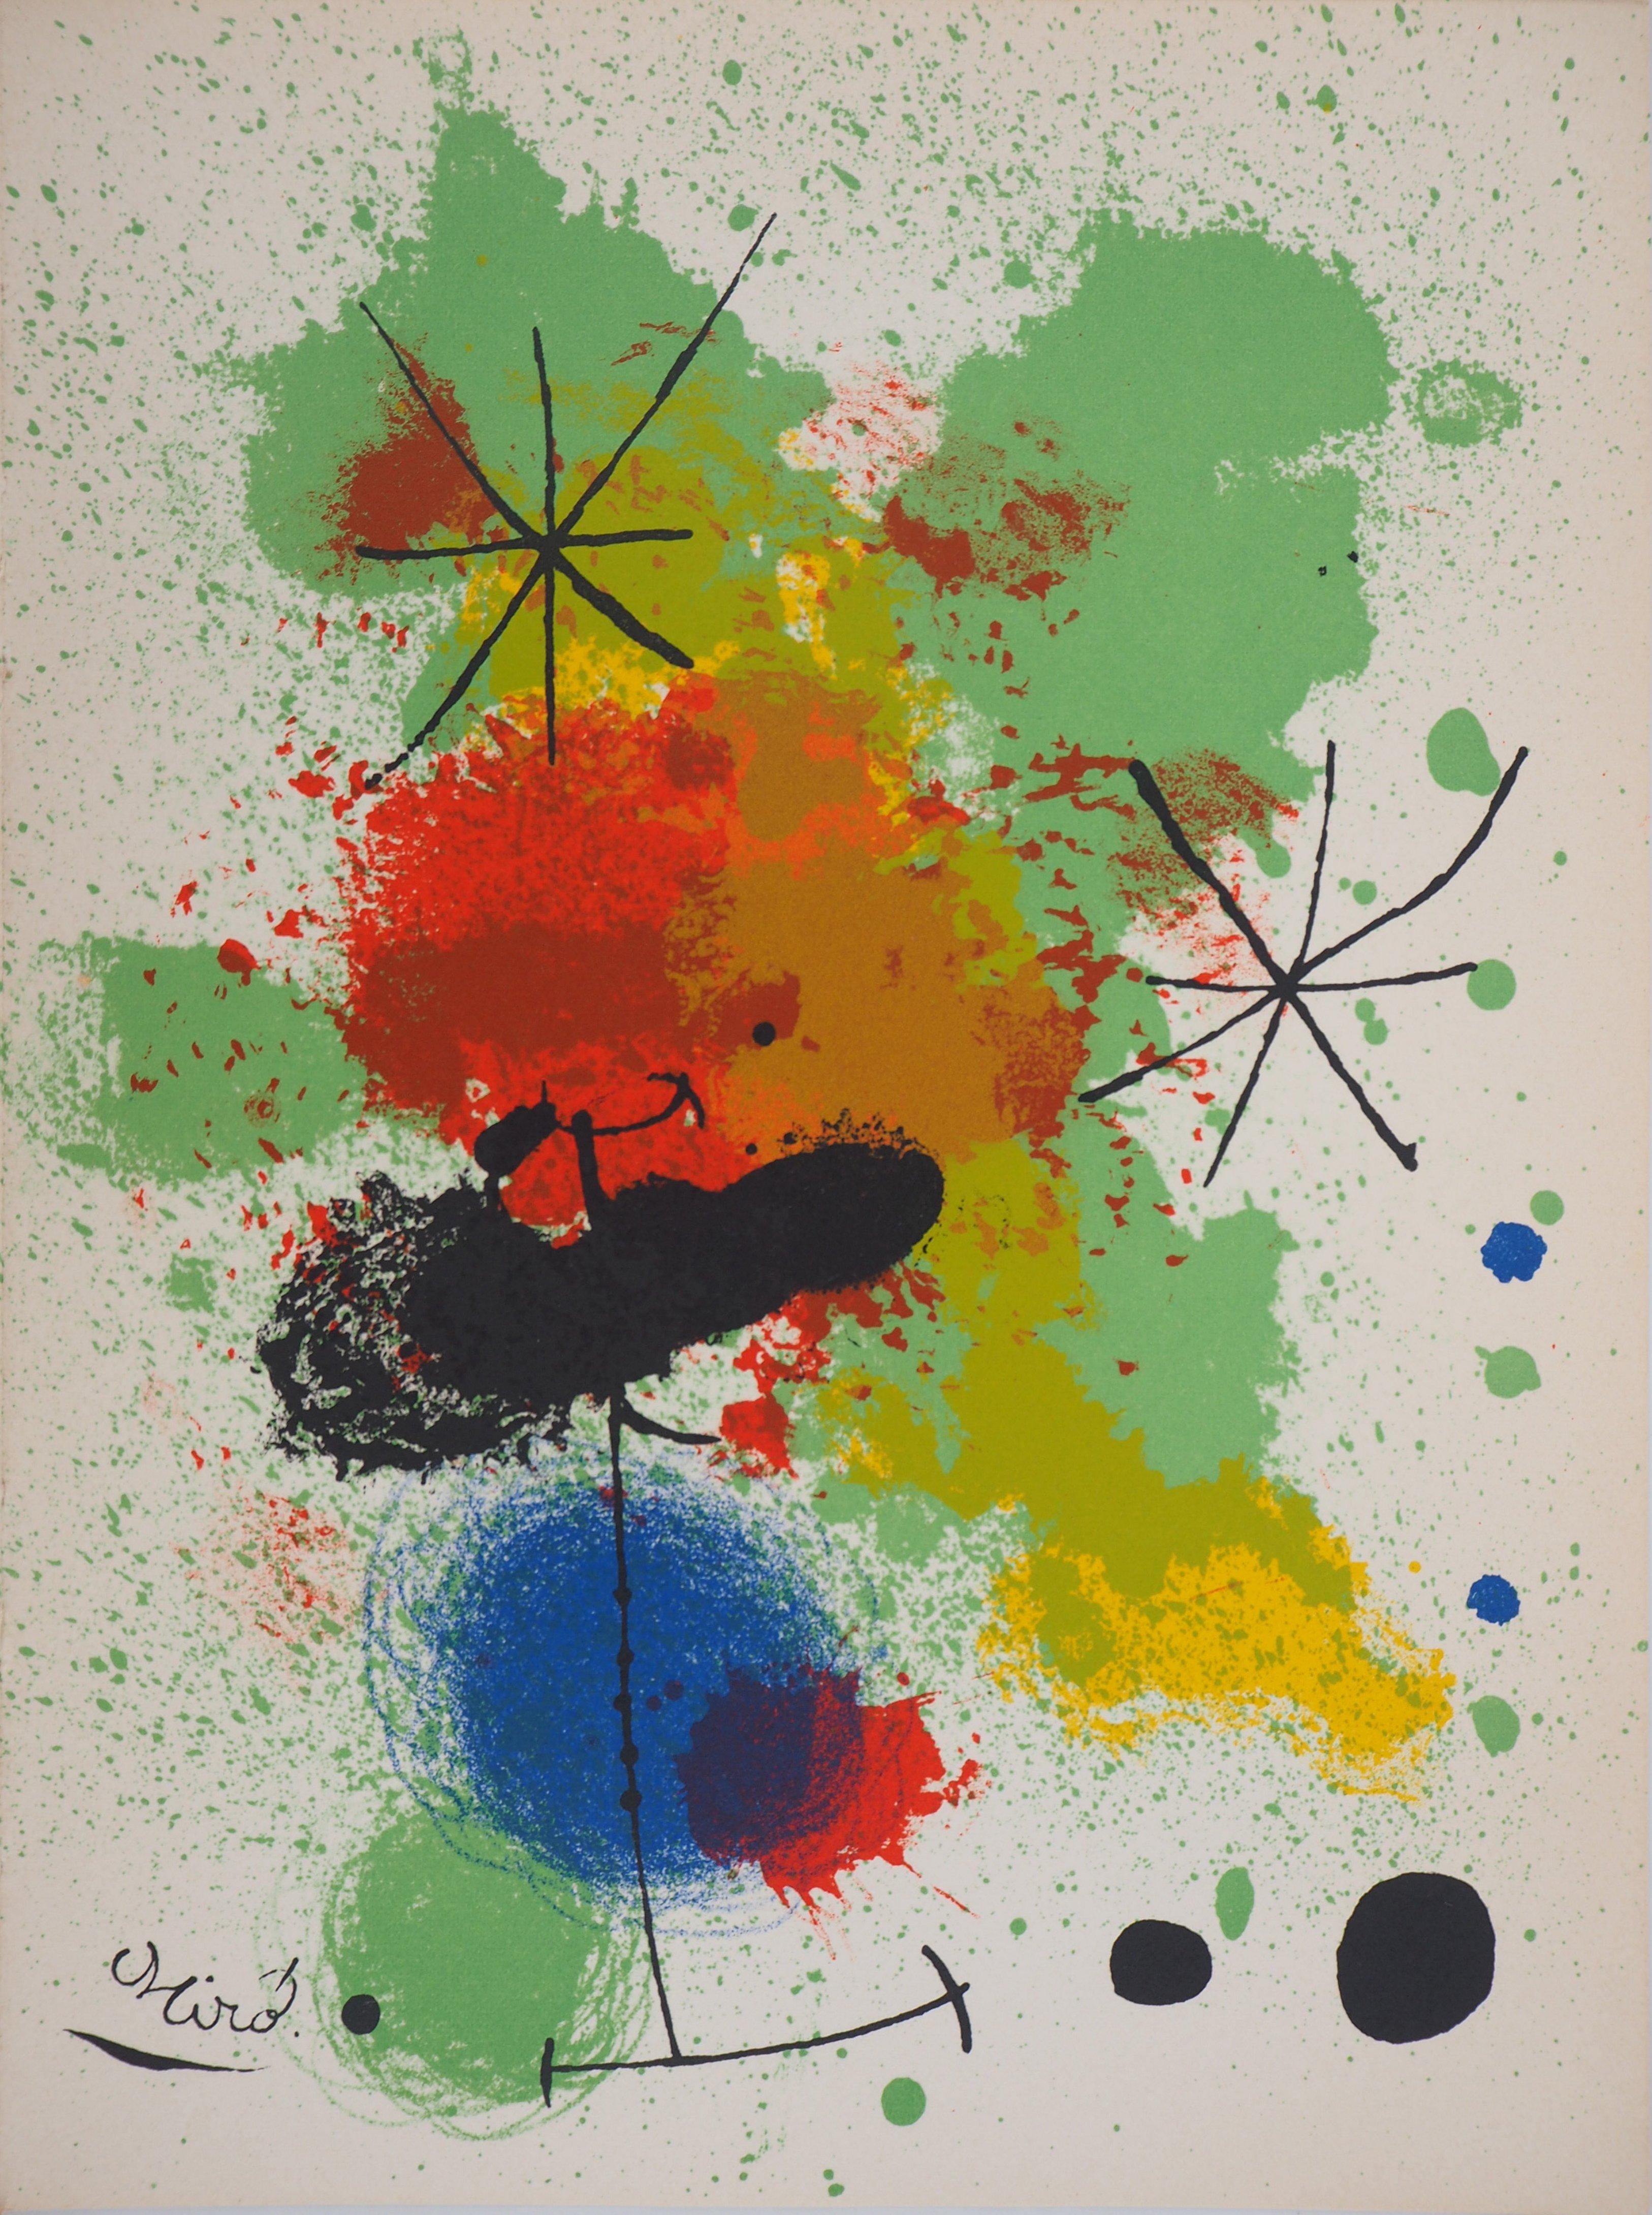 Joan Miró Abstract Print - Composition with Stars - Original lithograph (Mourlot)